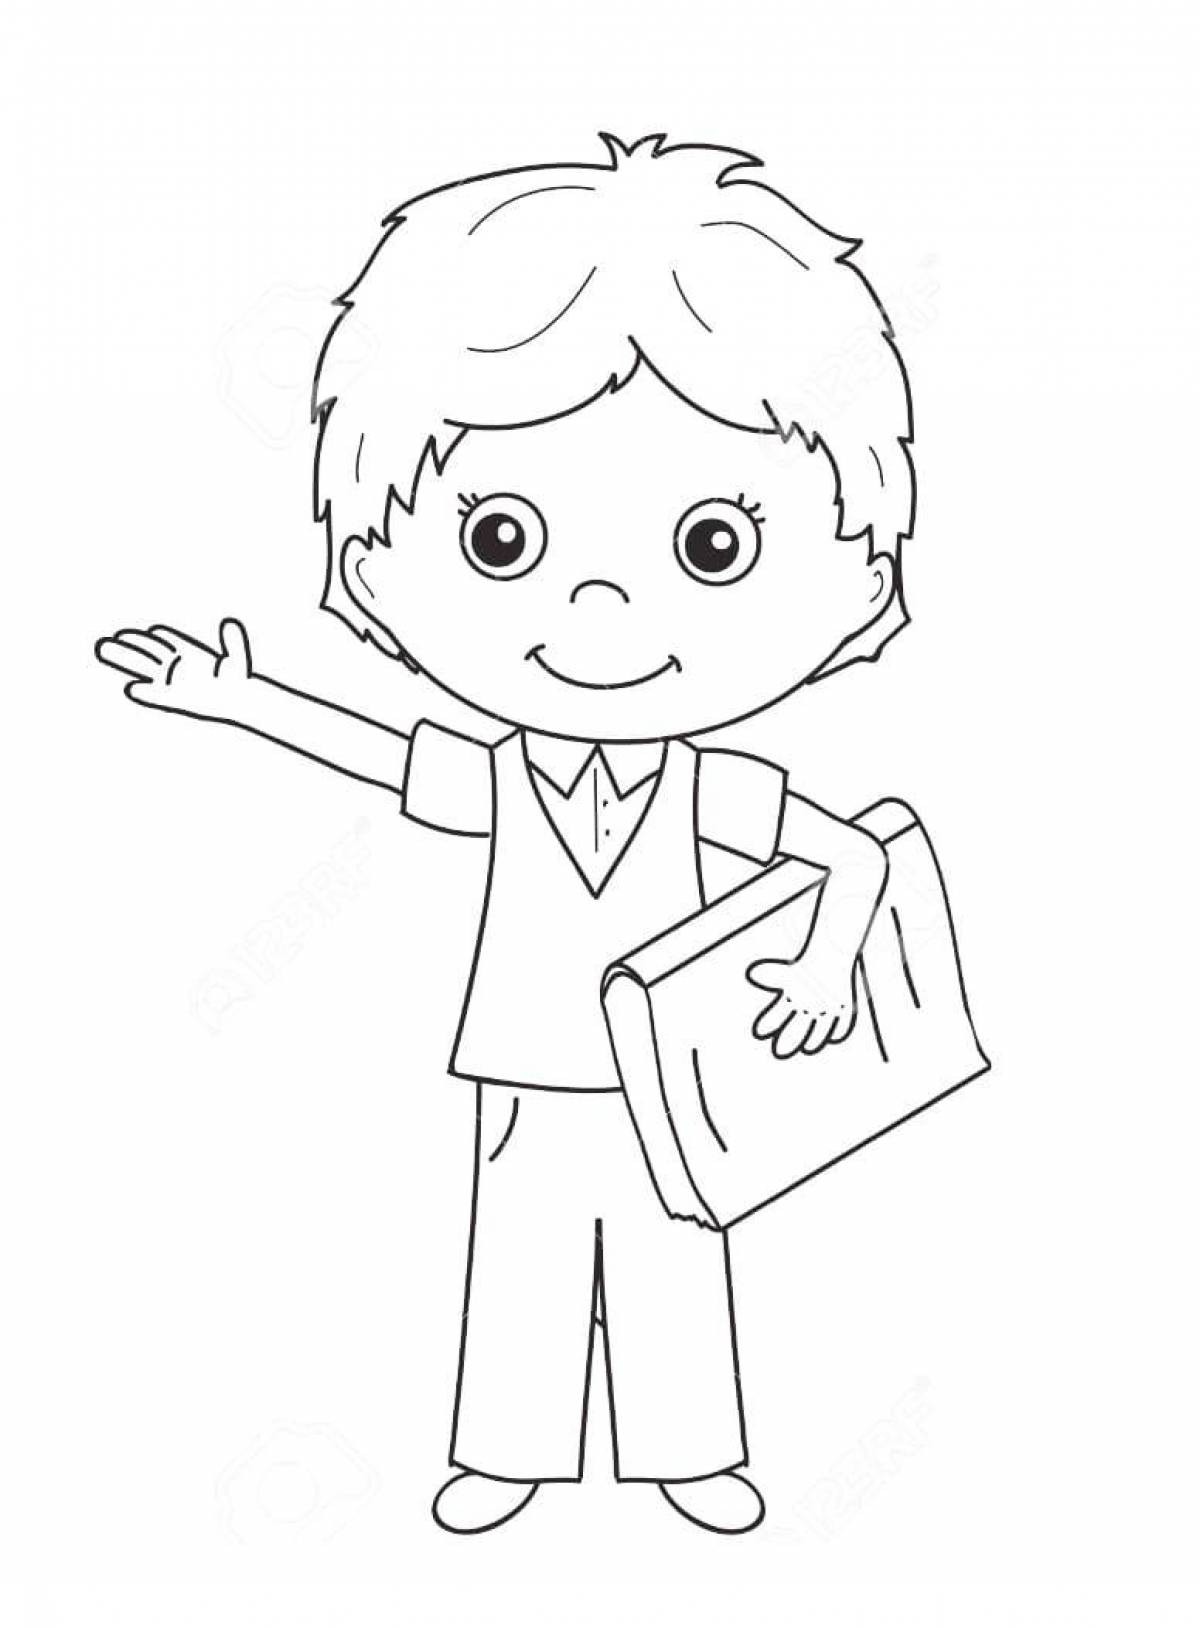 Popeyplaytime amazing coloring page